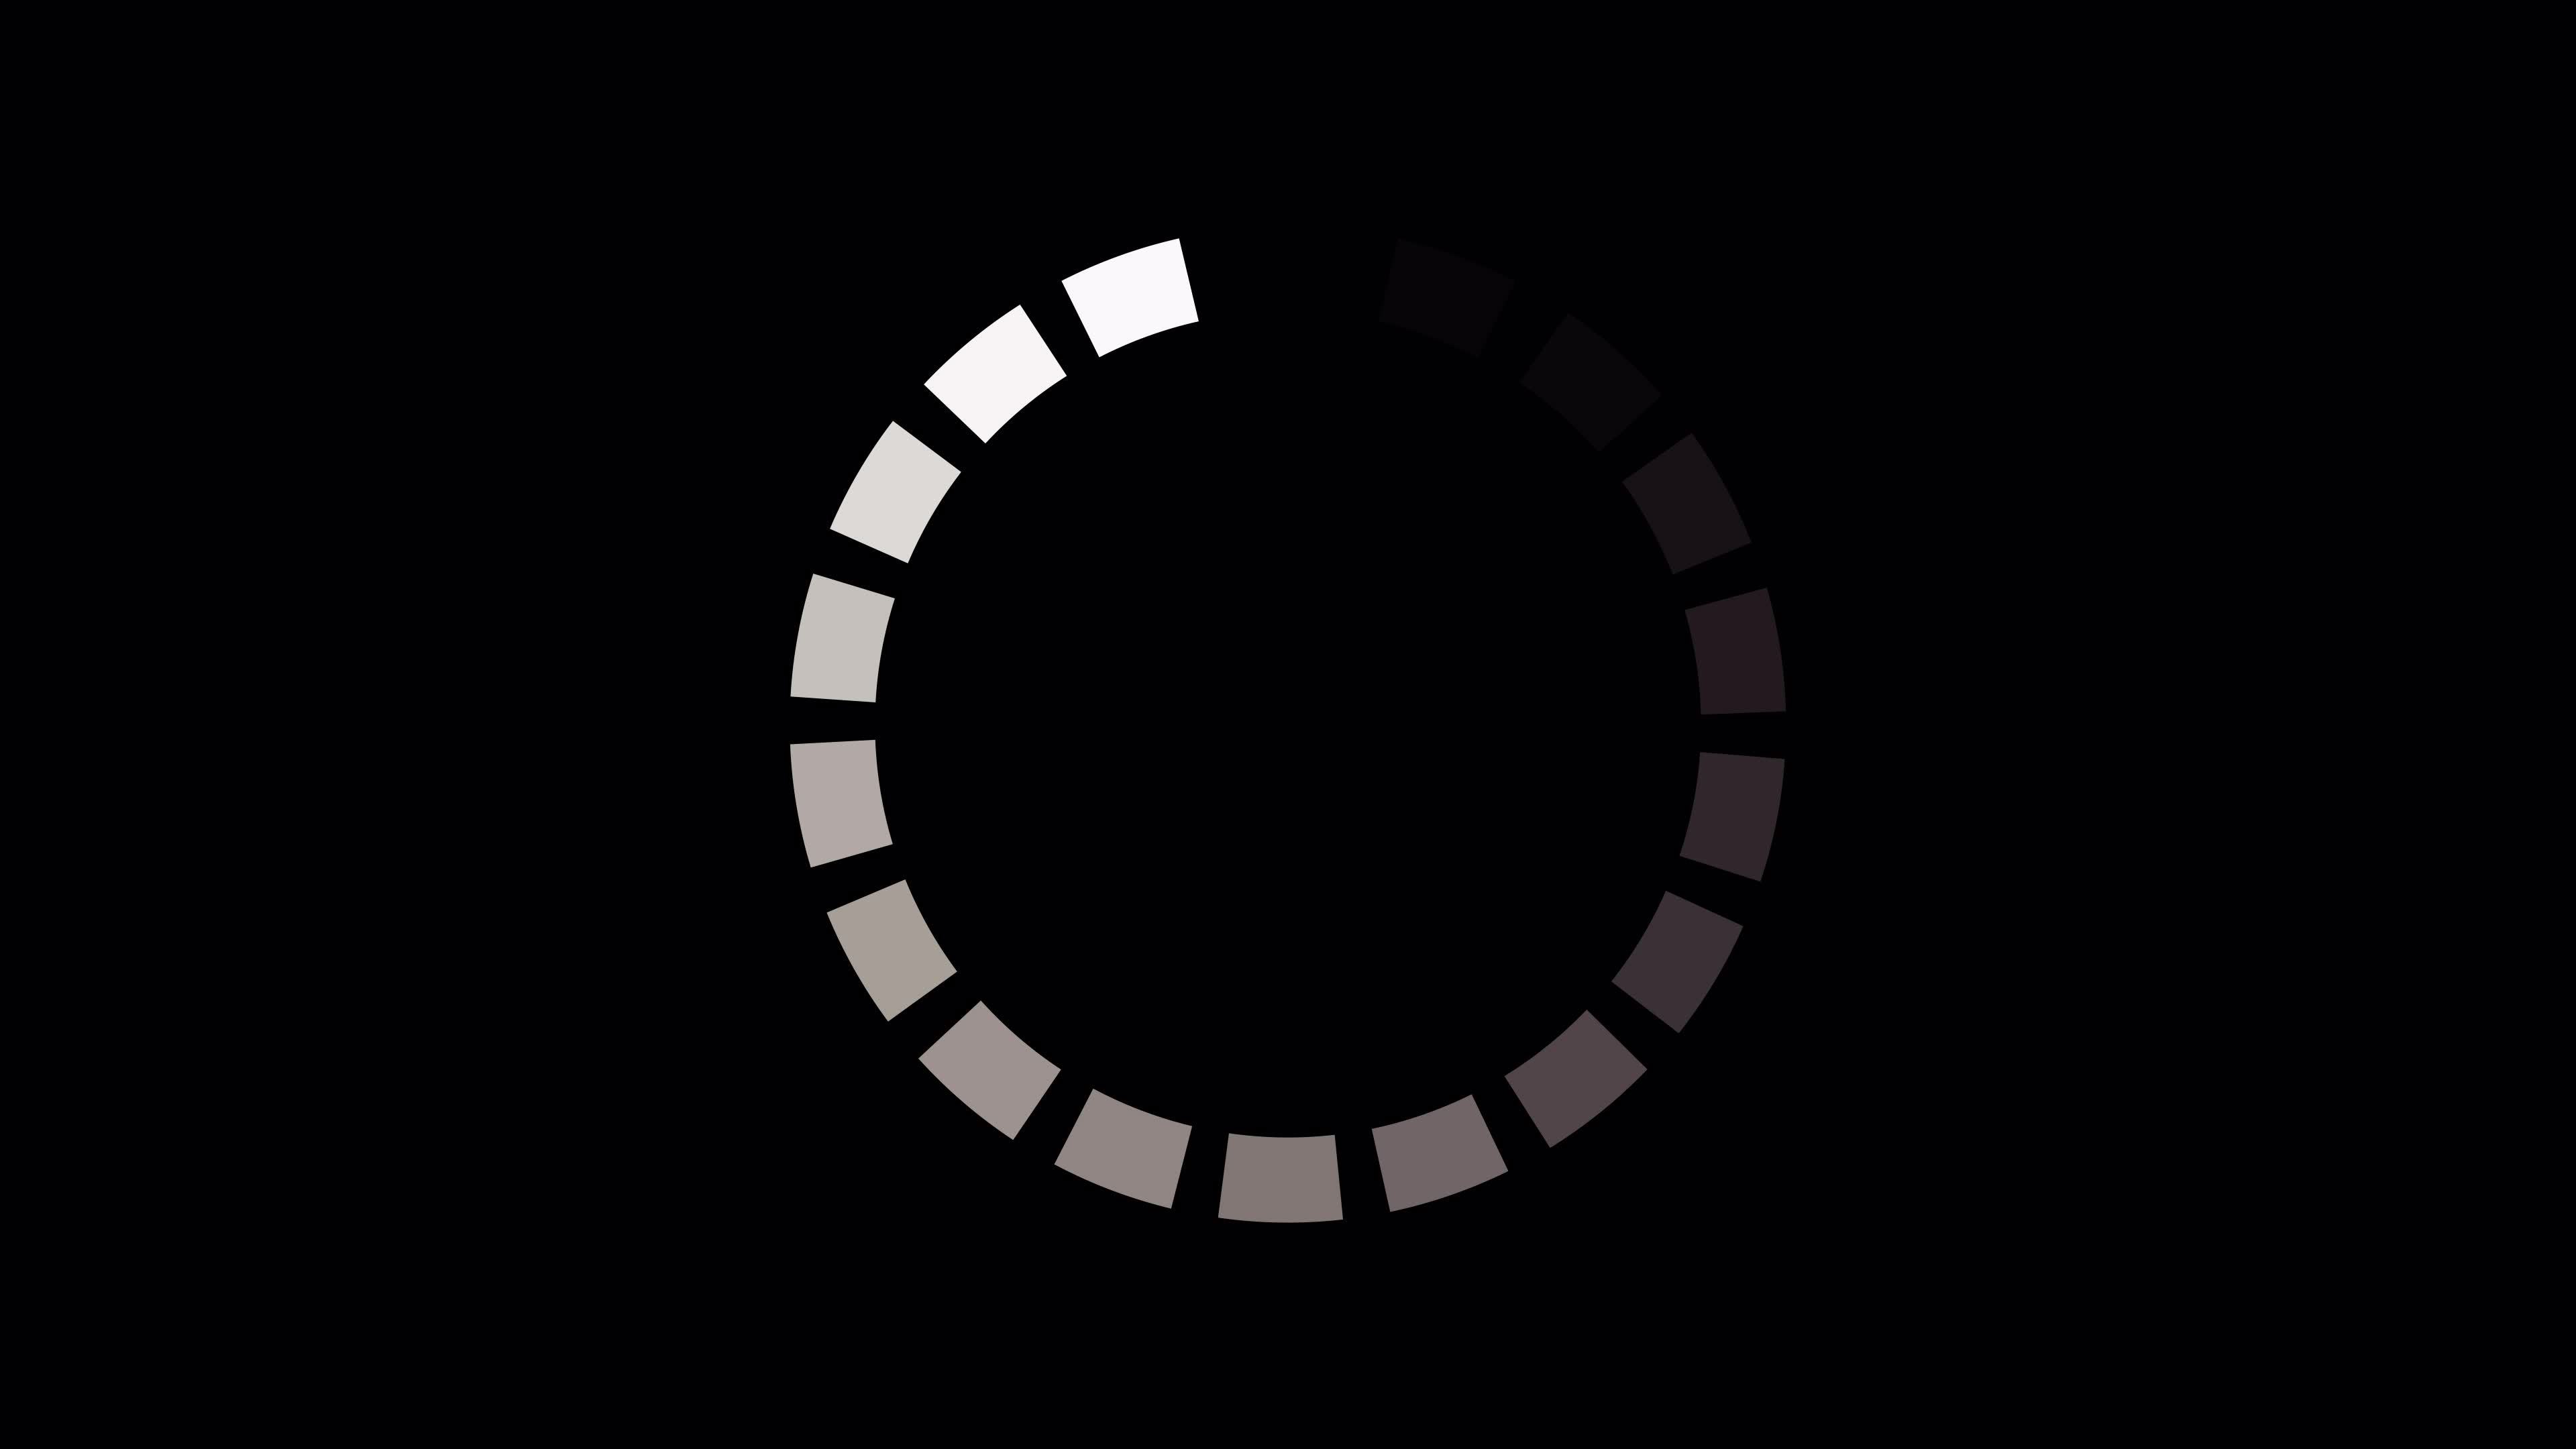 animation - loading circle icon loading gif, loading screen gif, loading  video, spinner gif, video loading animation, video loading, on black  background 8202358 Stock Video at Vecteezy